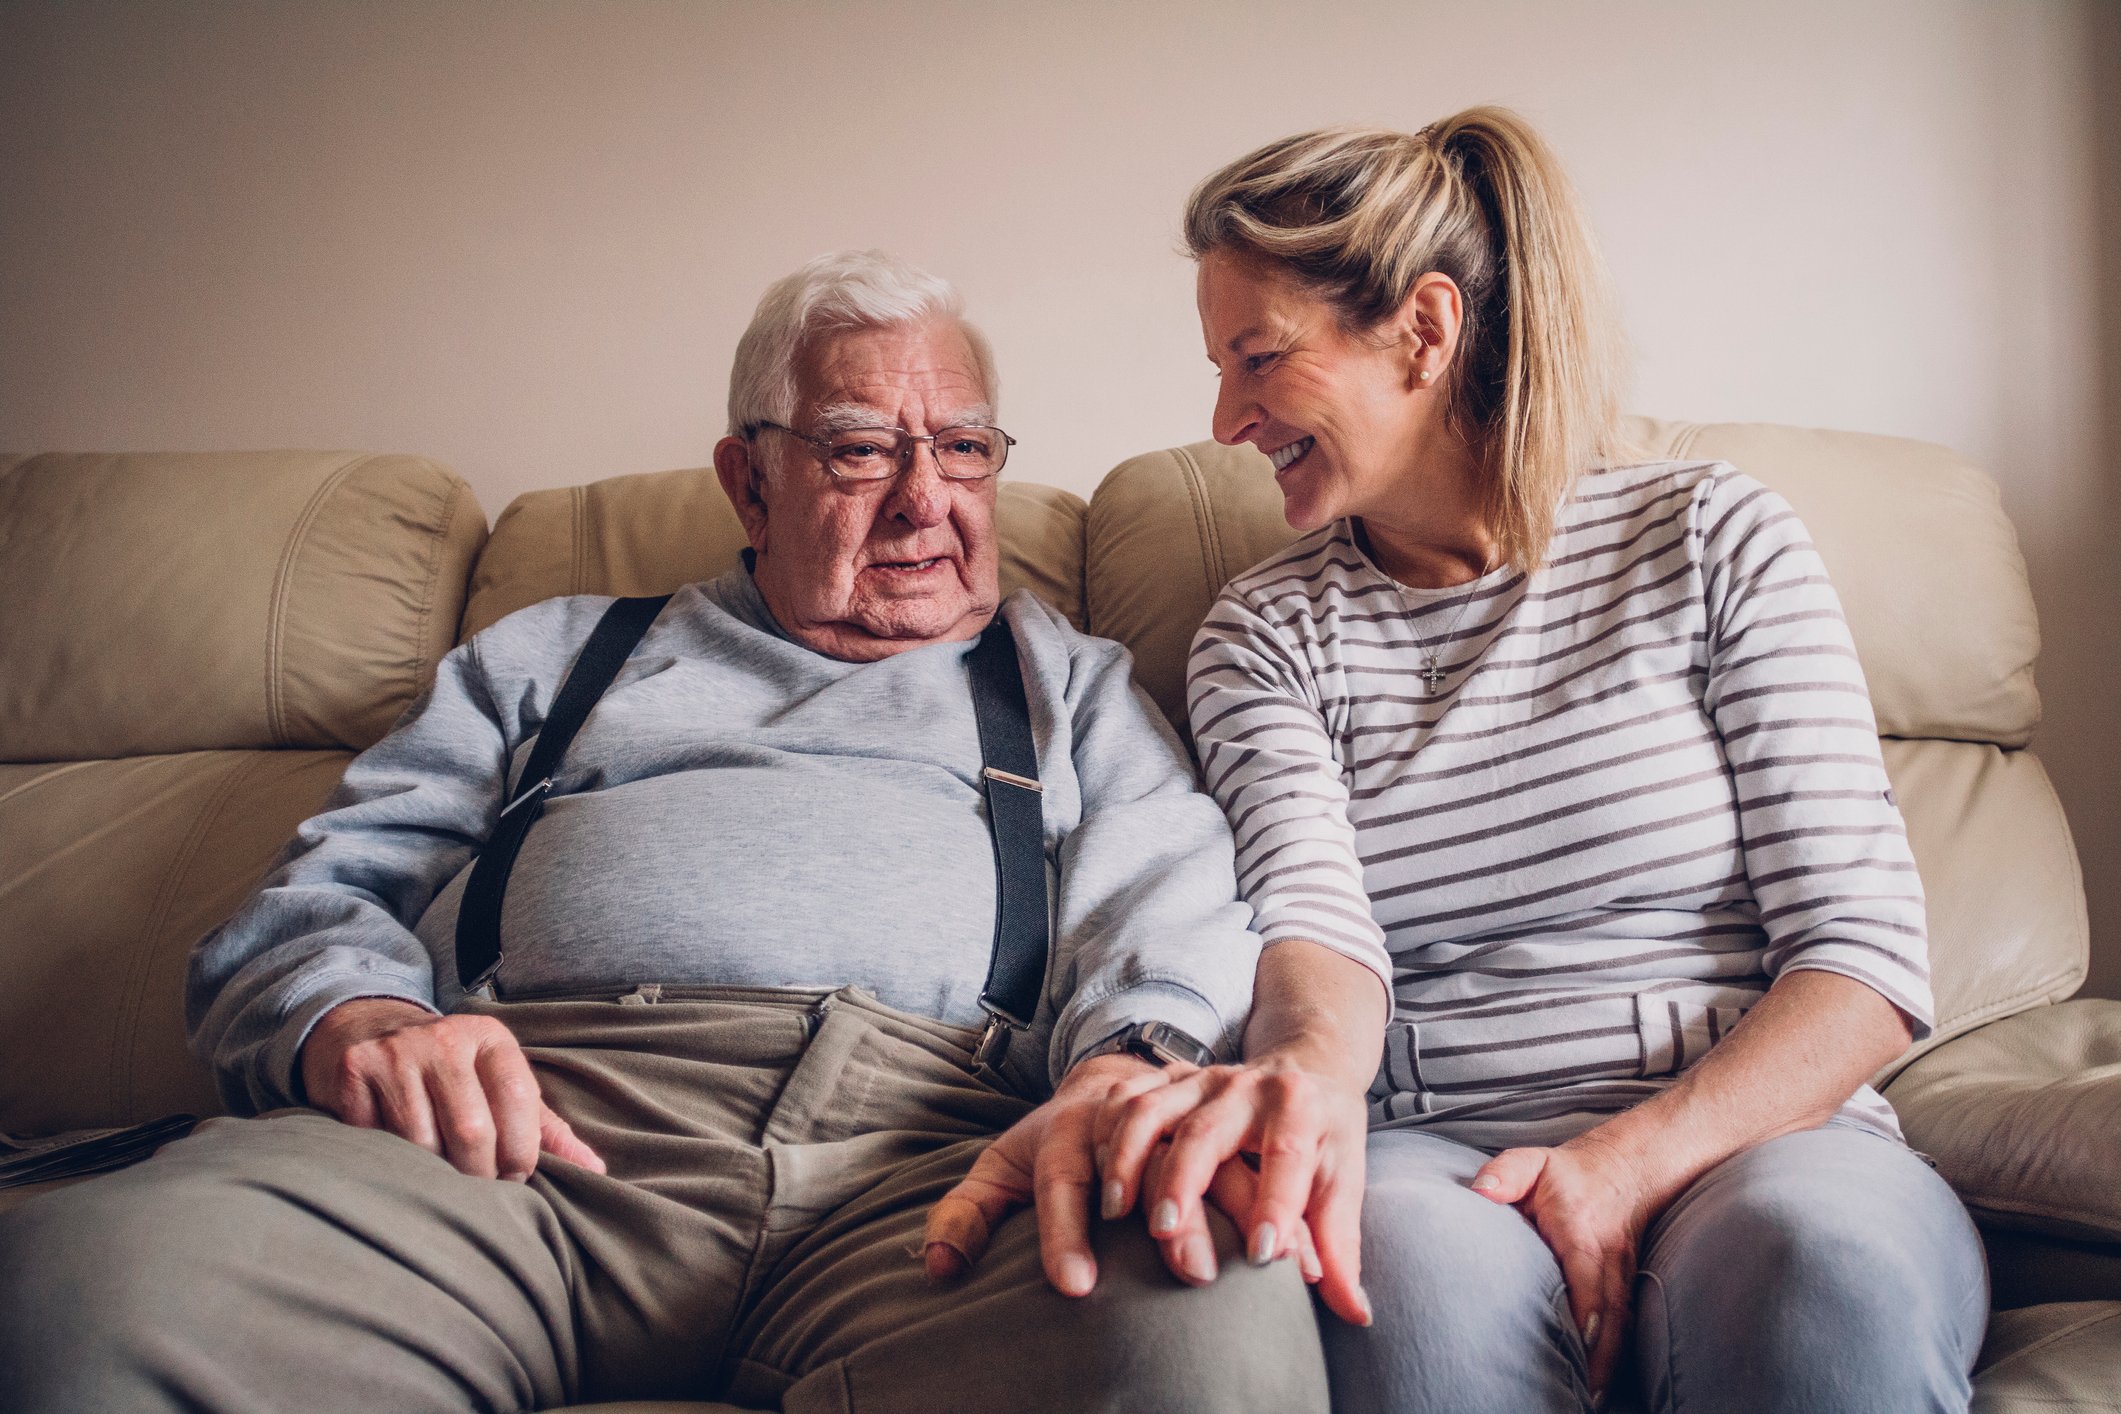 Family Caregiving Challenges for the Sandwich Generation